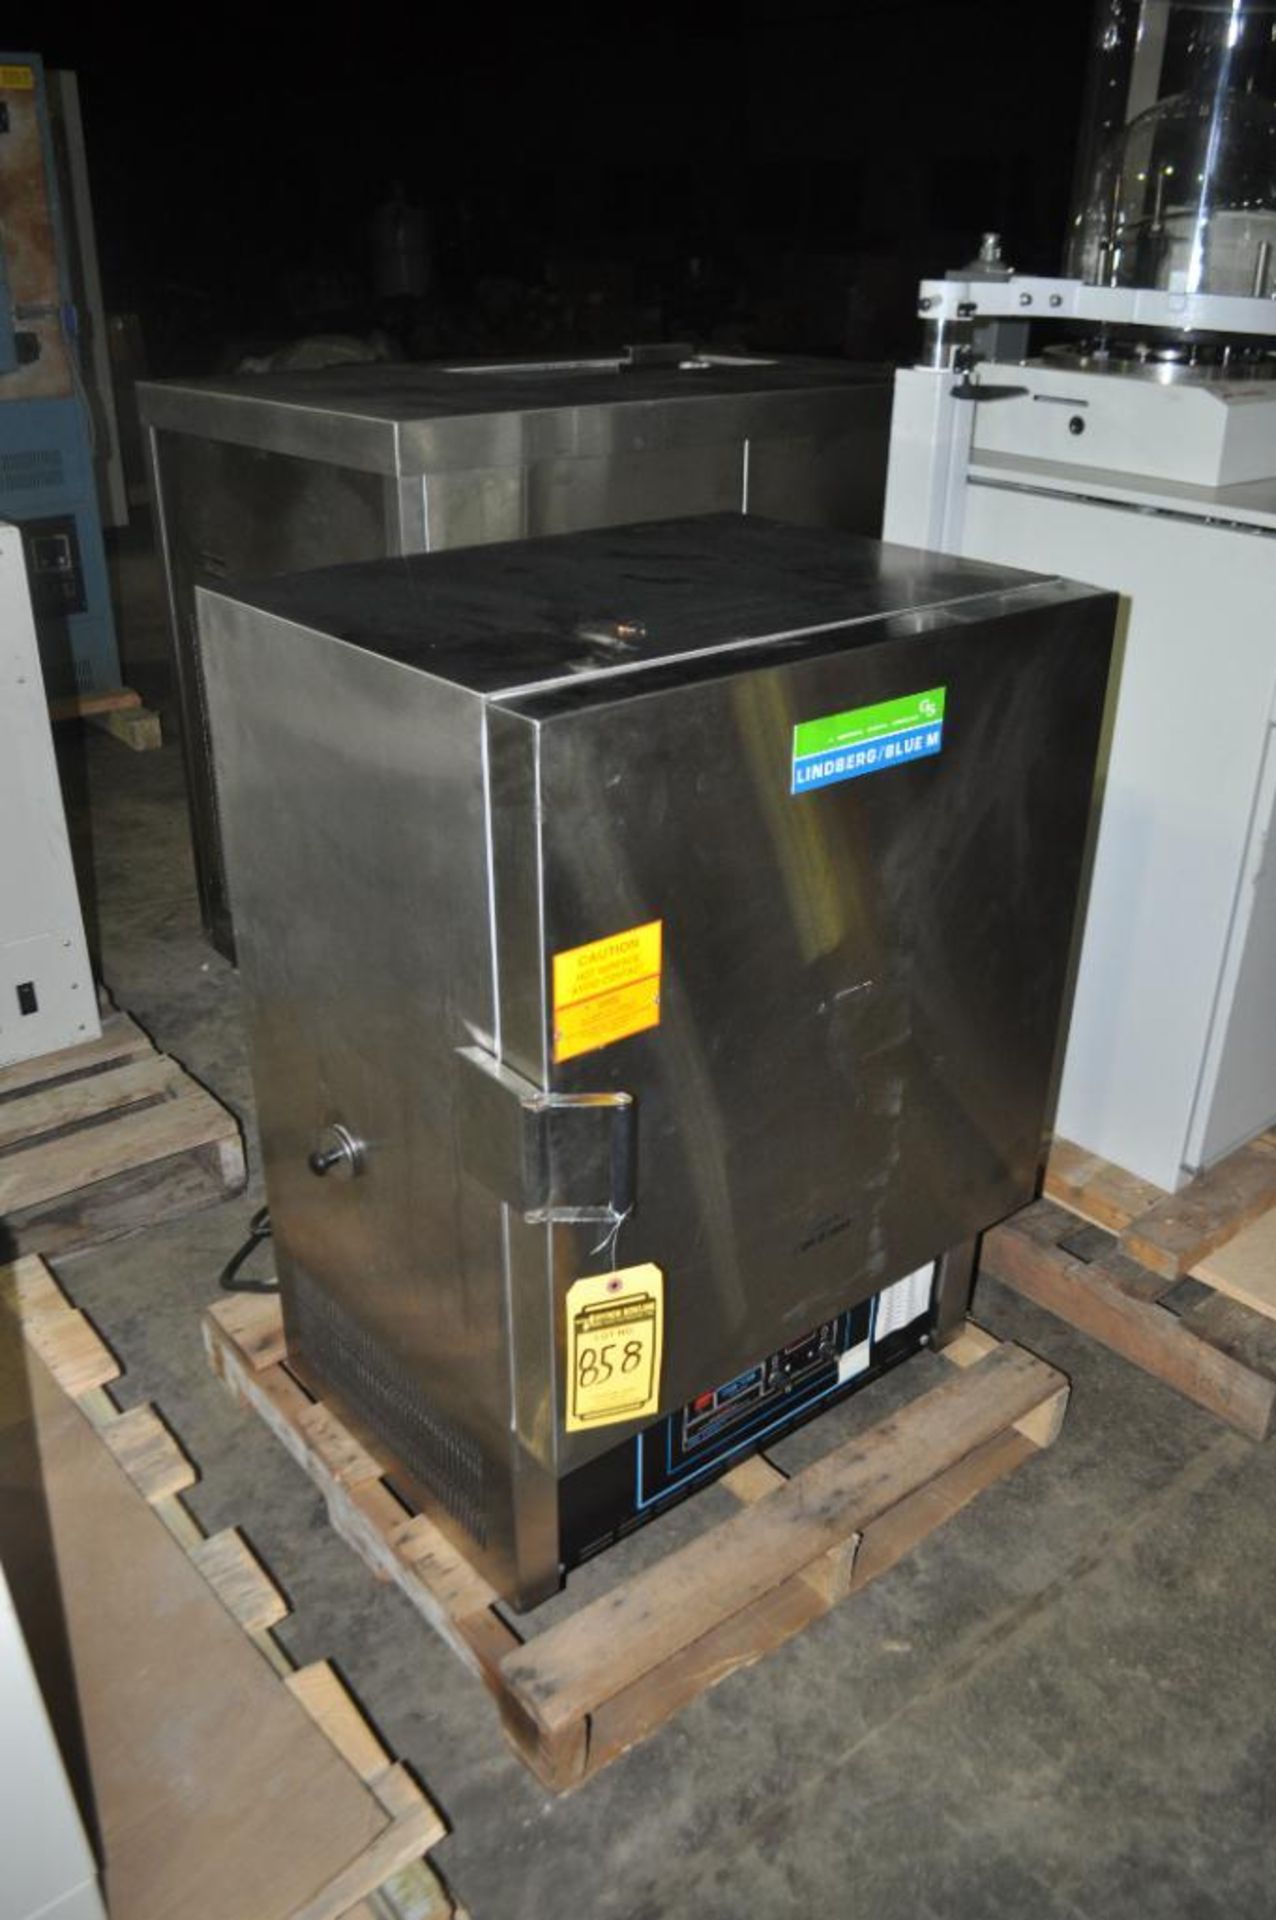 BLUE M STABIL-THERM PROTRONIX 2 ELECTRIC LABORATORY OVEN W/ DIGITAL DISPLAY - Image 3 of 5